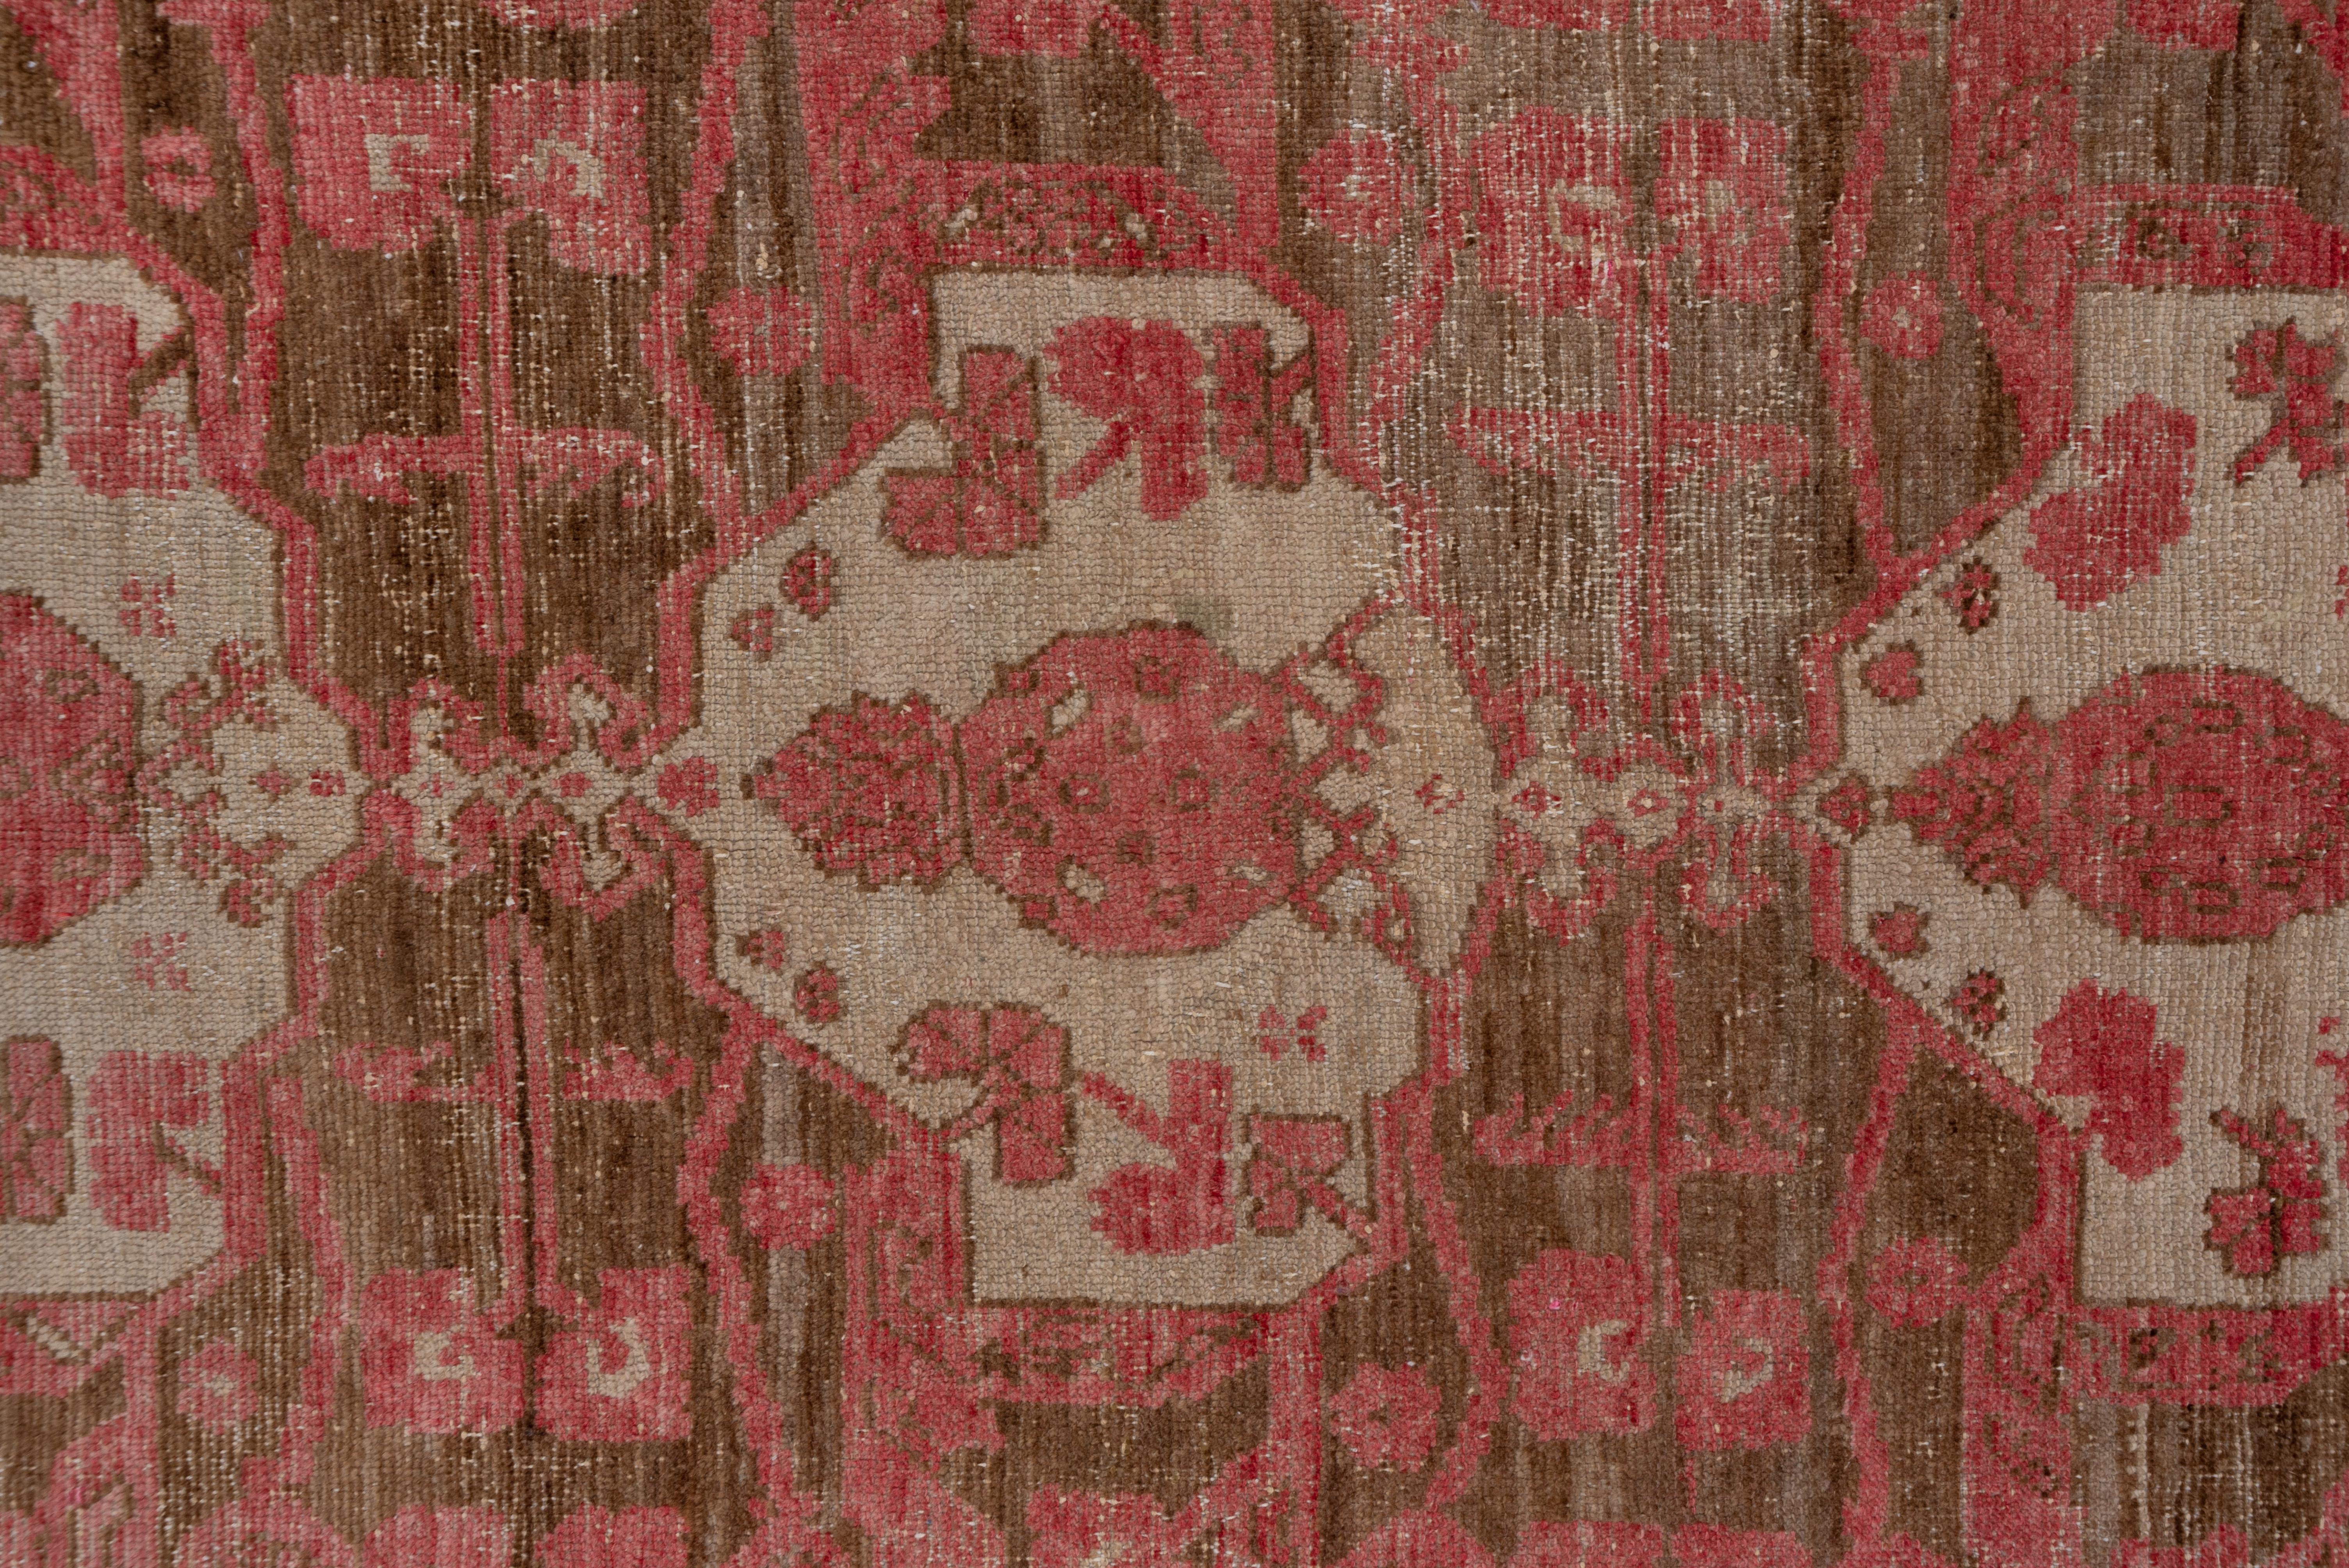 Hand-Knotted Antique Pink Turkish Kula Long Rug, circa 1930s, Pink and Brown Field For Sale